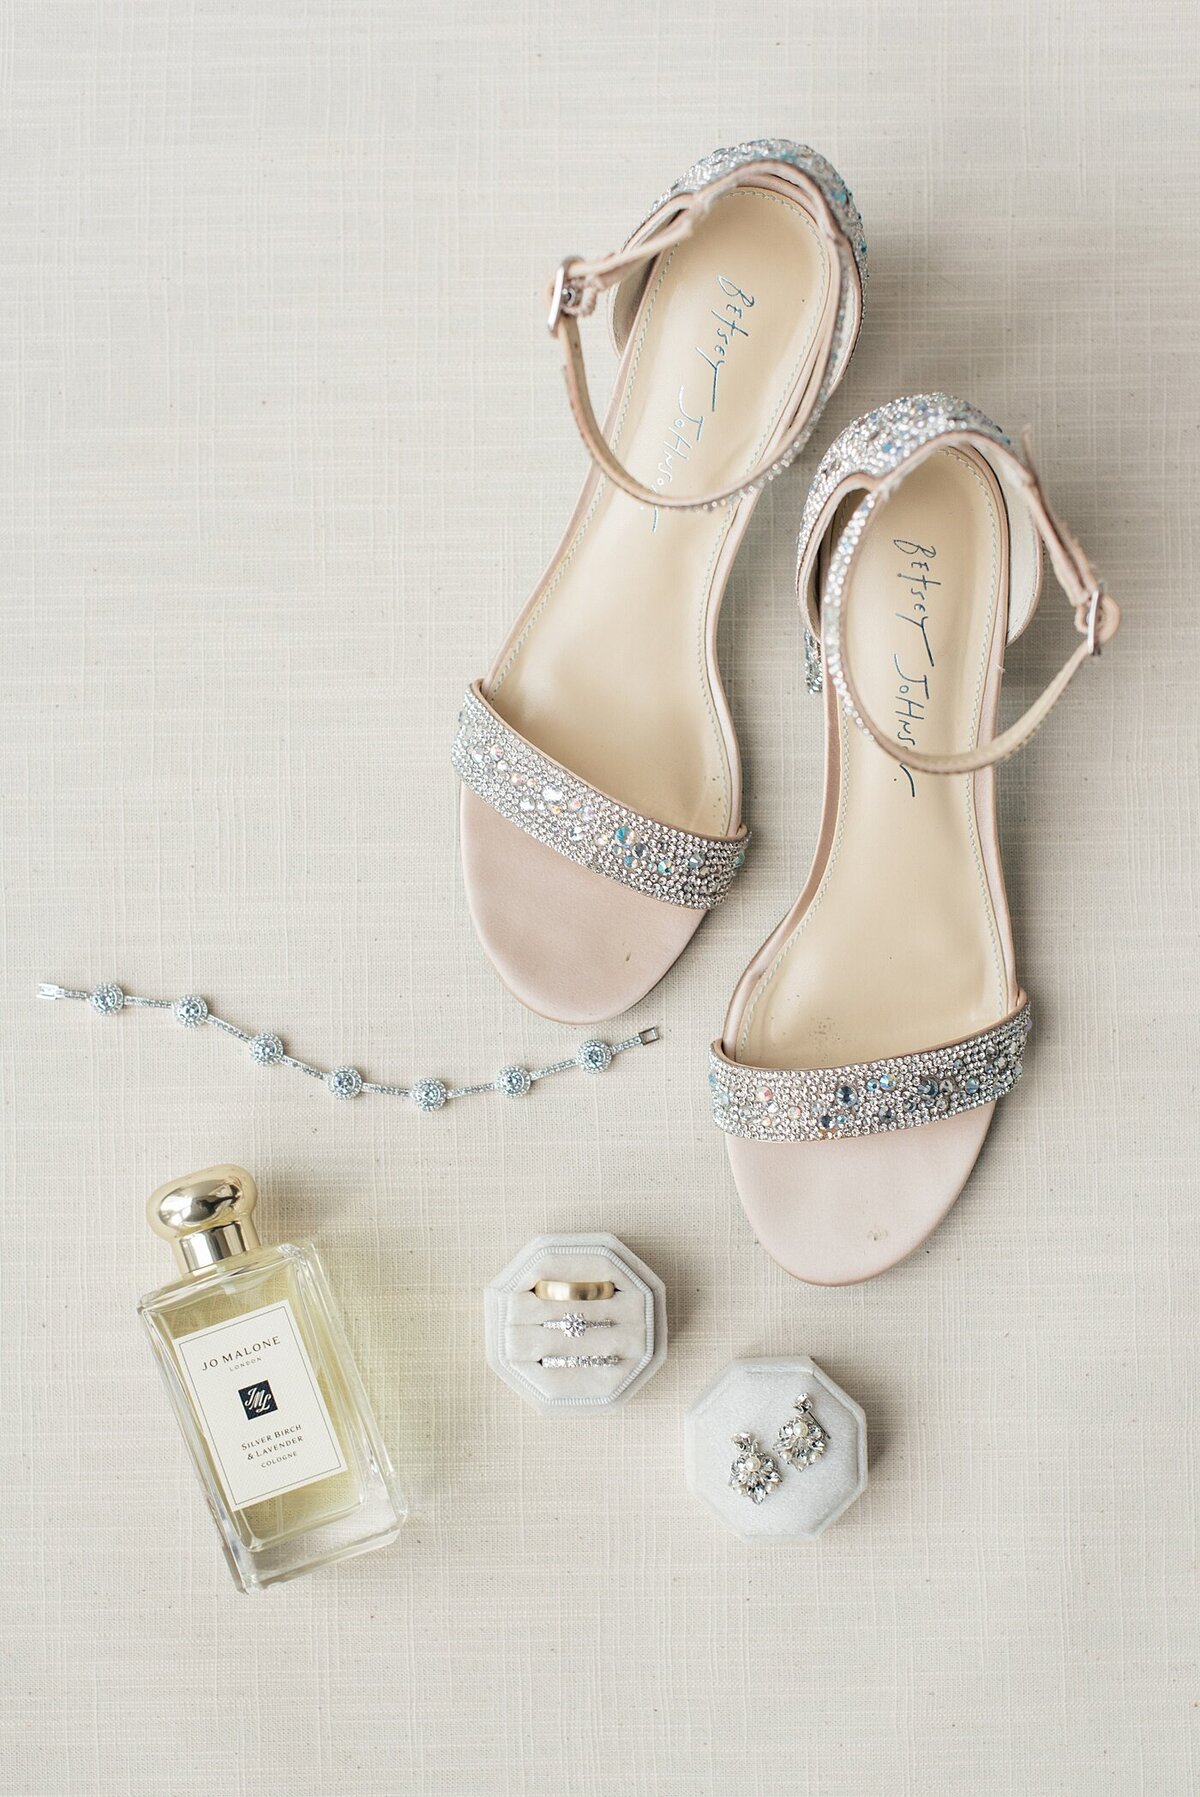 Wedding shoes and details taken by Ohio Wedding Photographer